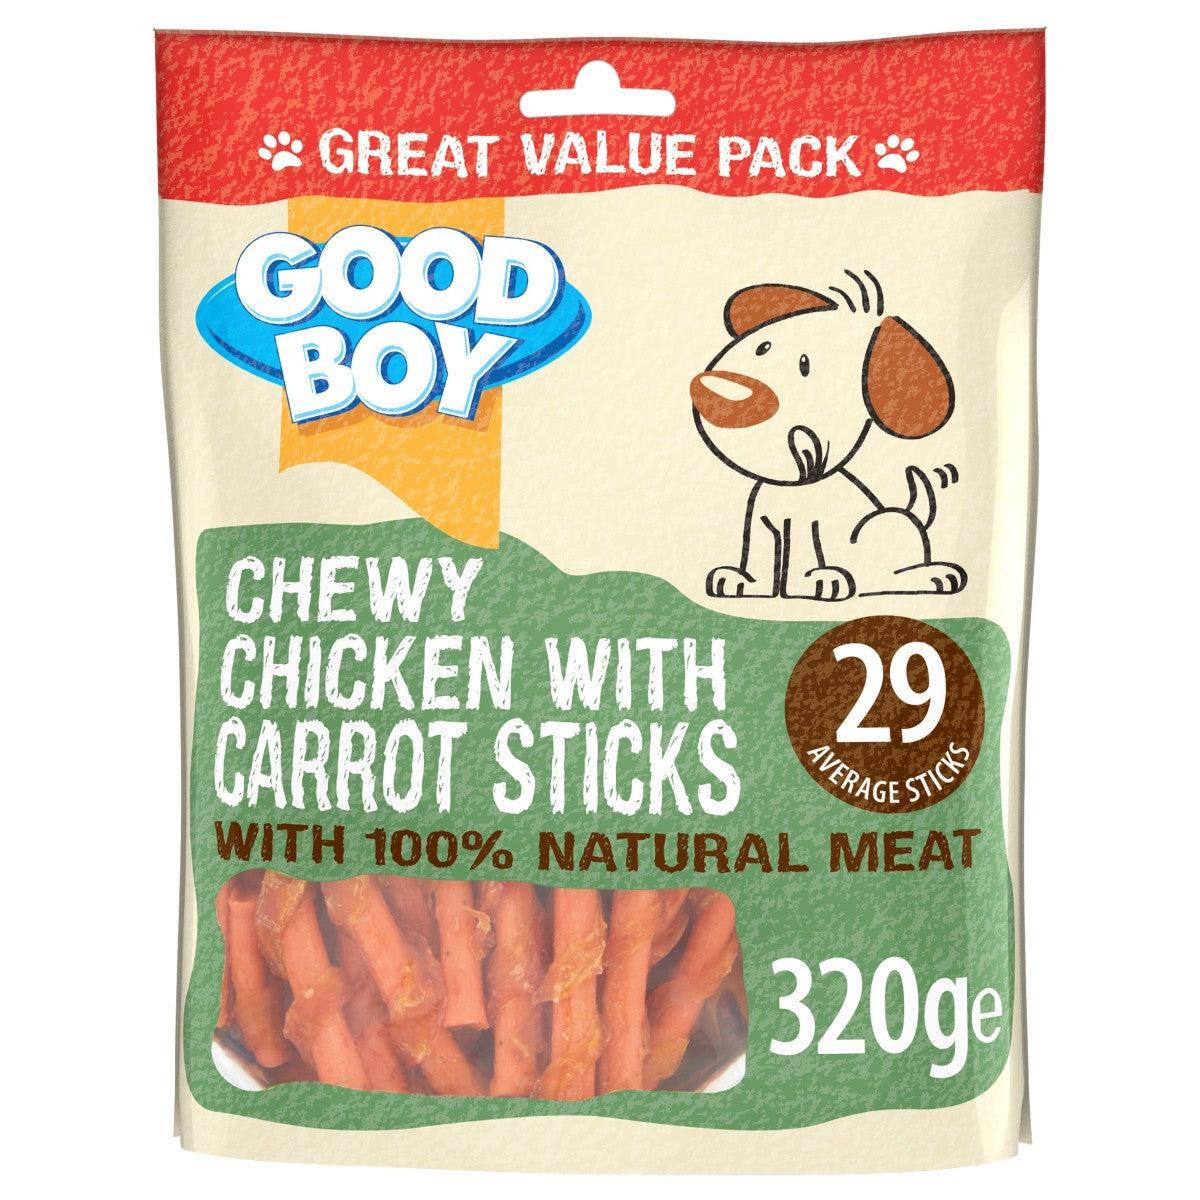 Good Boy Pawsley & Co Chewy Chicken with Carrot Sticks